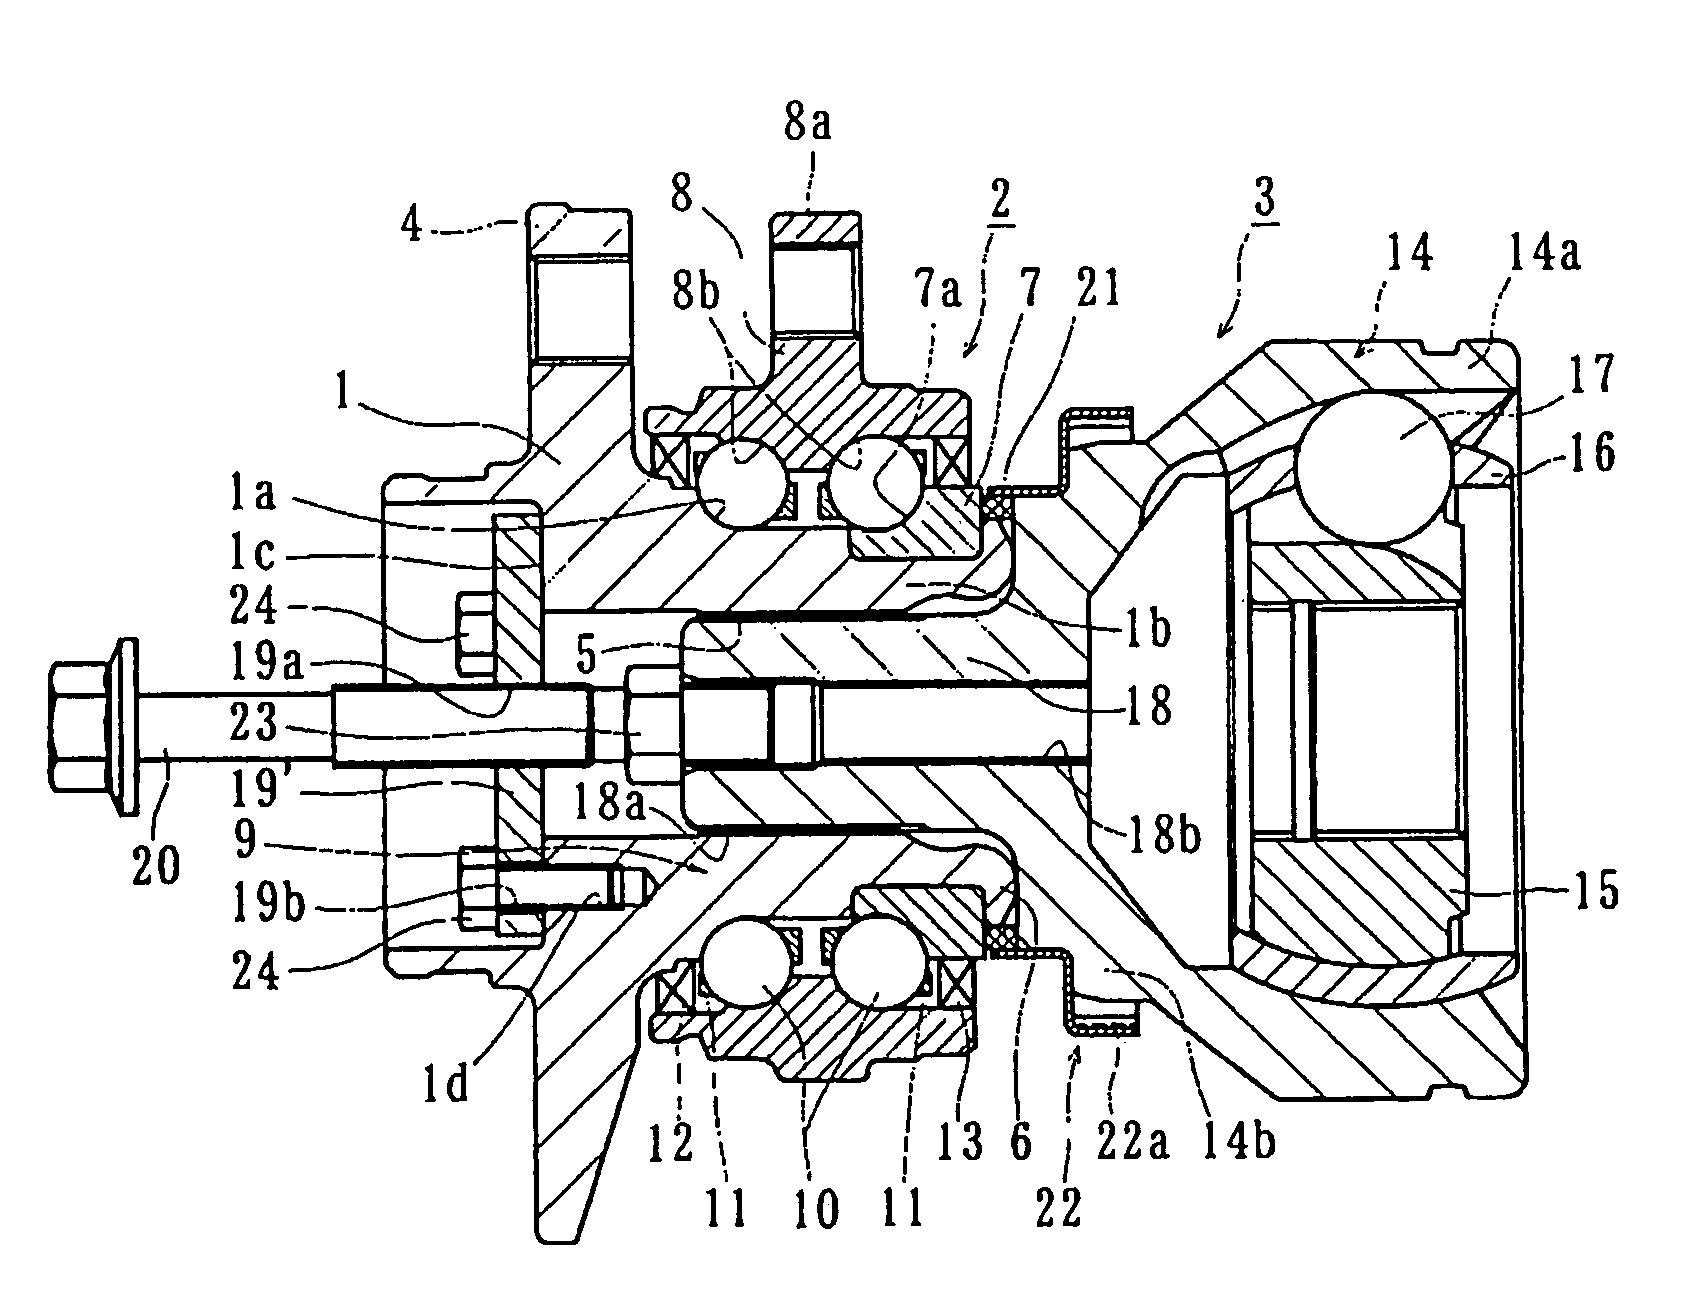 Bearing apparatus for a driving wheel of vehicle